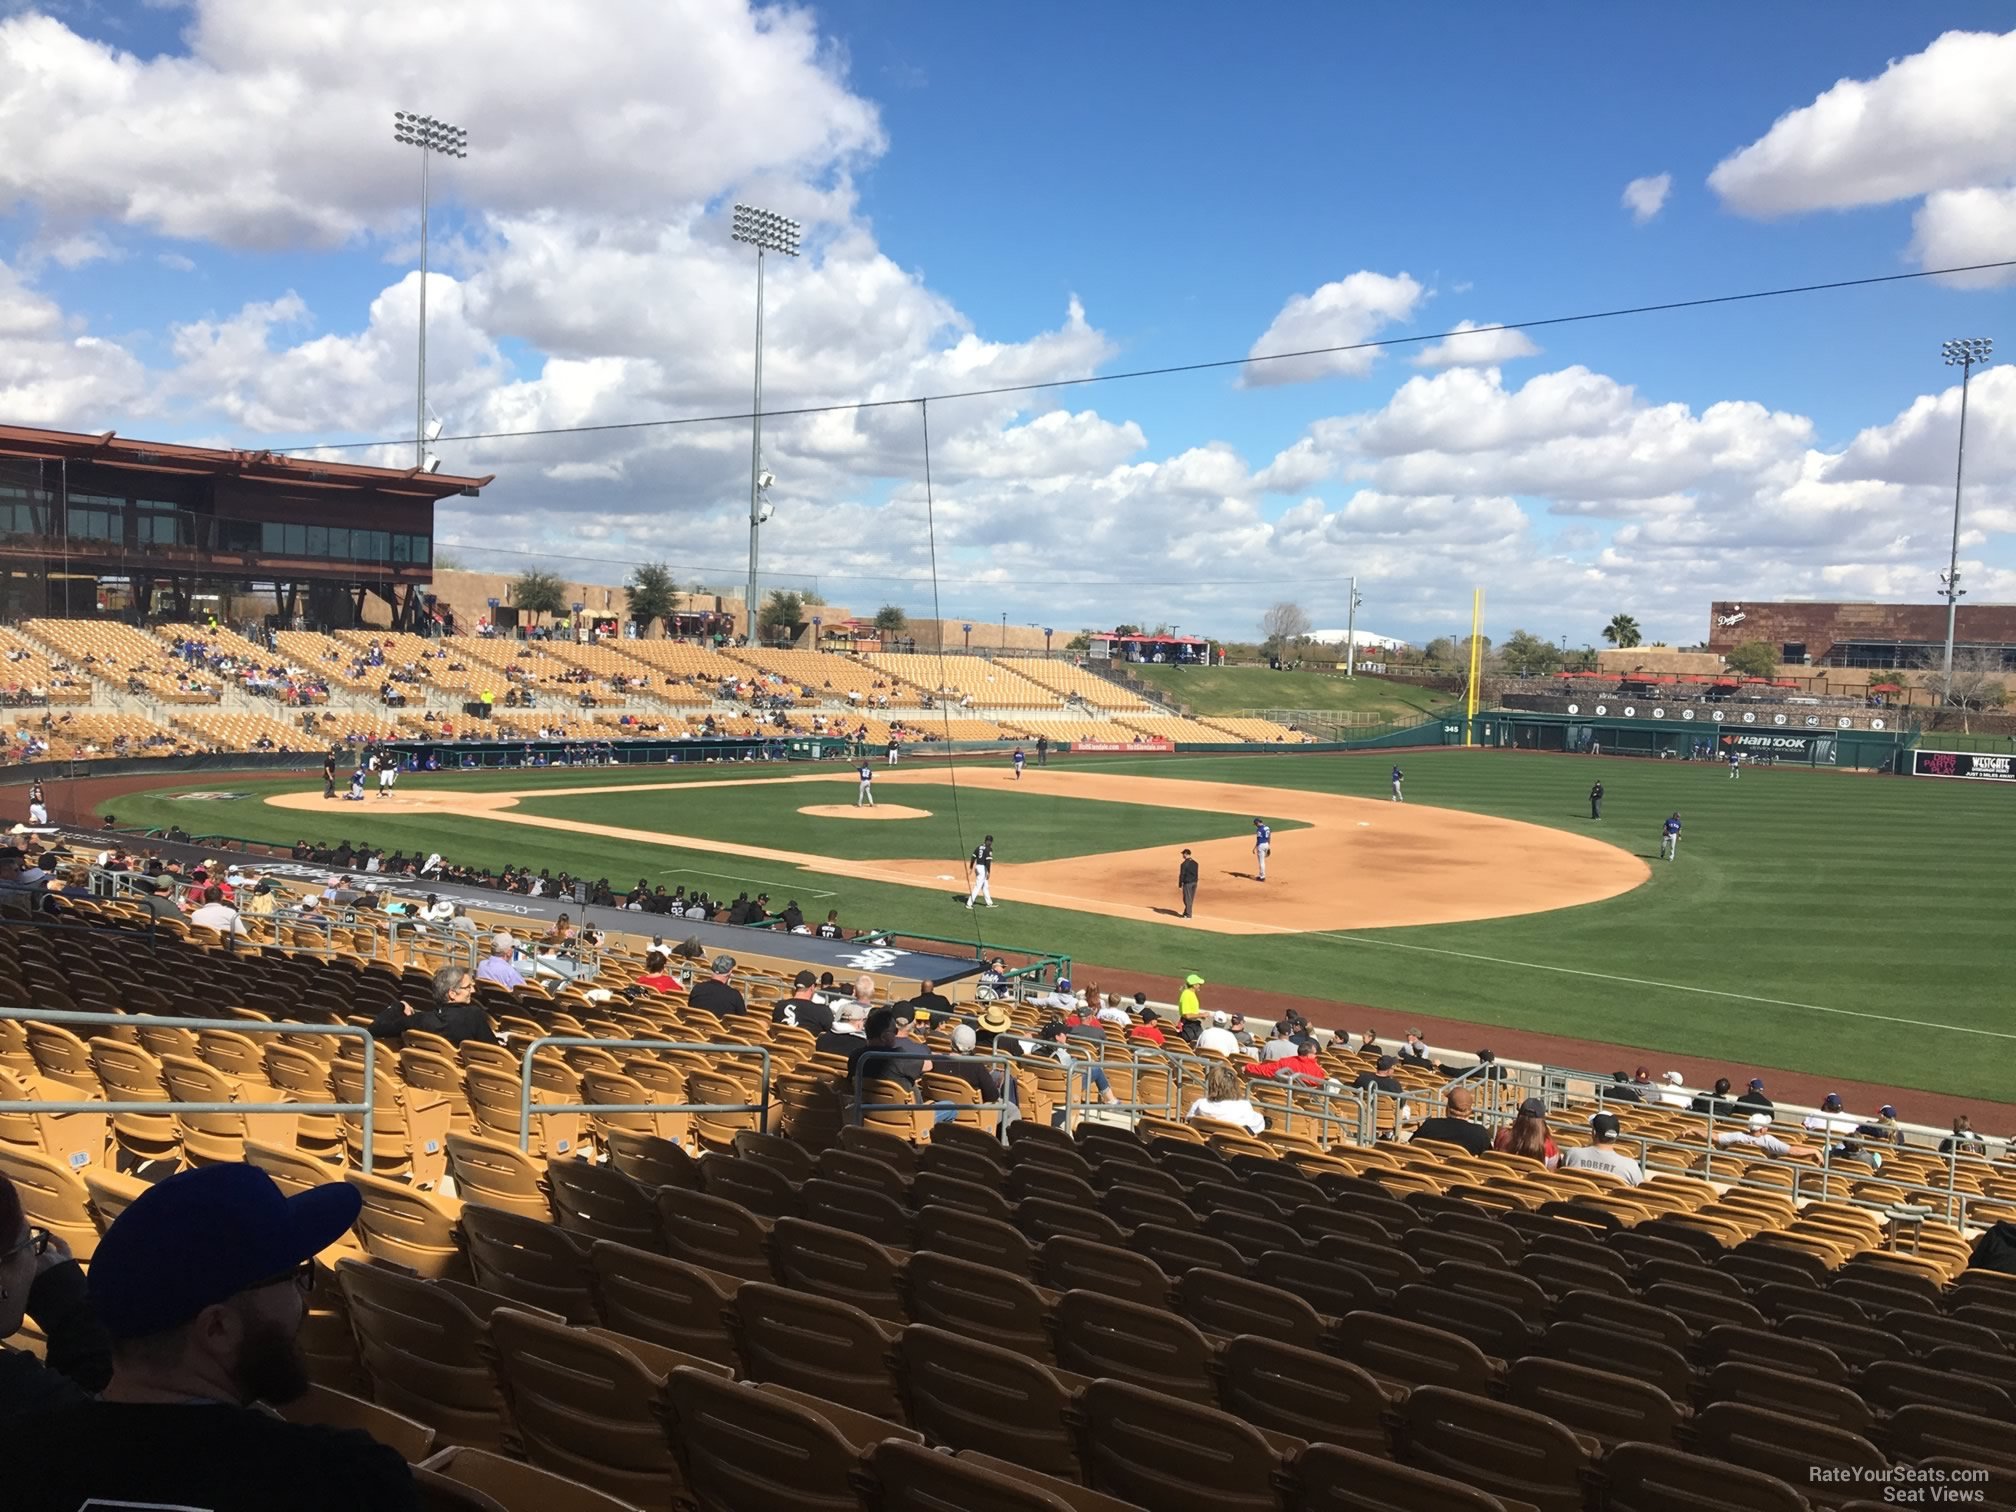 section 104, row 18 seat view  - camelback ranch